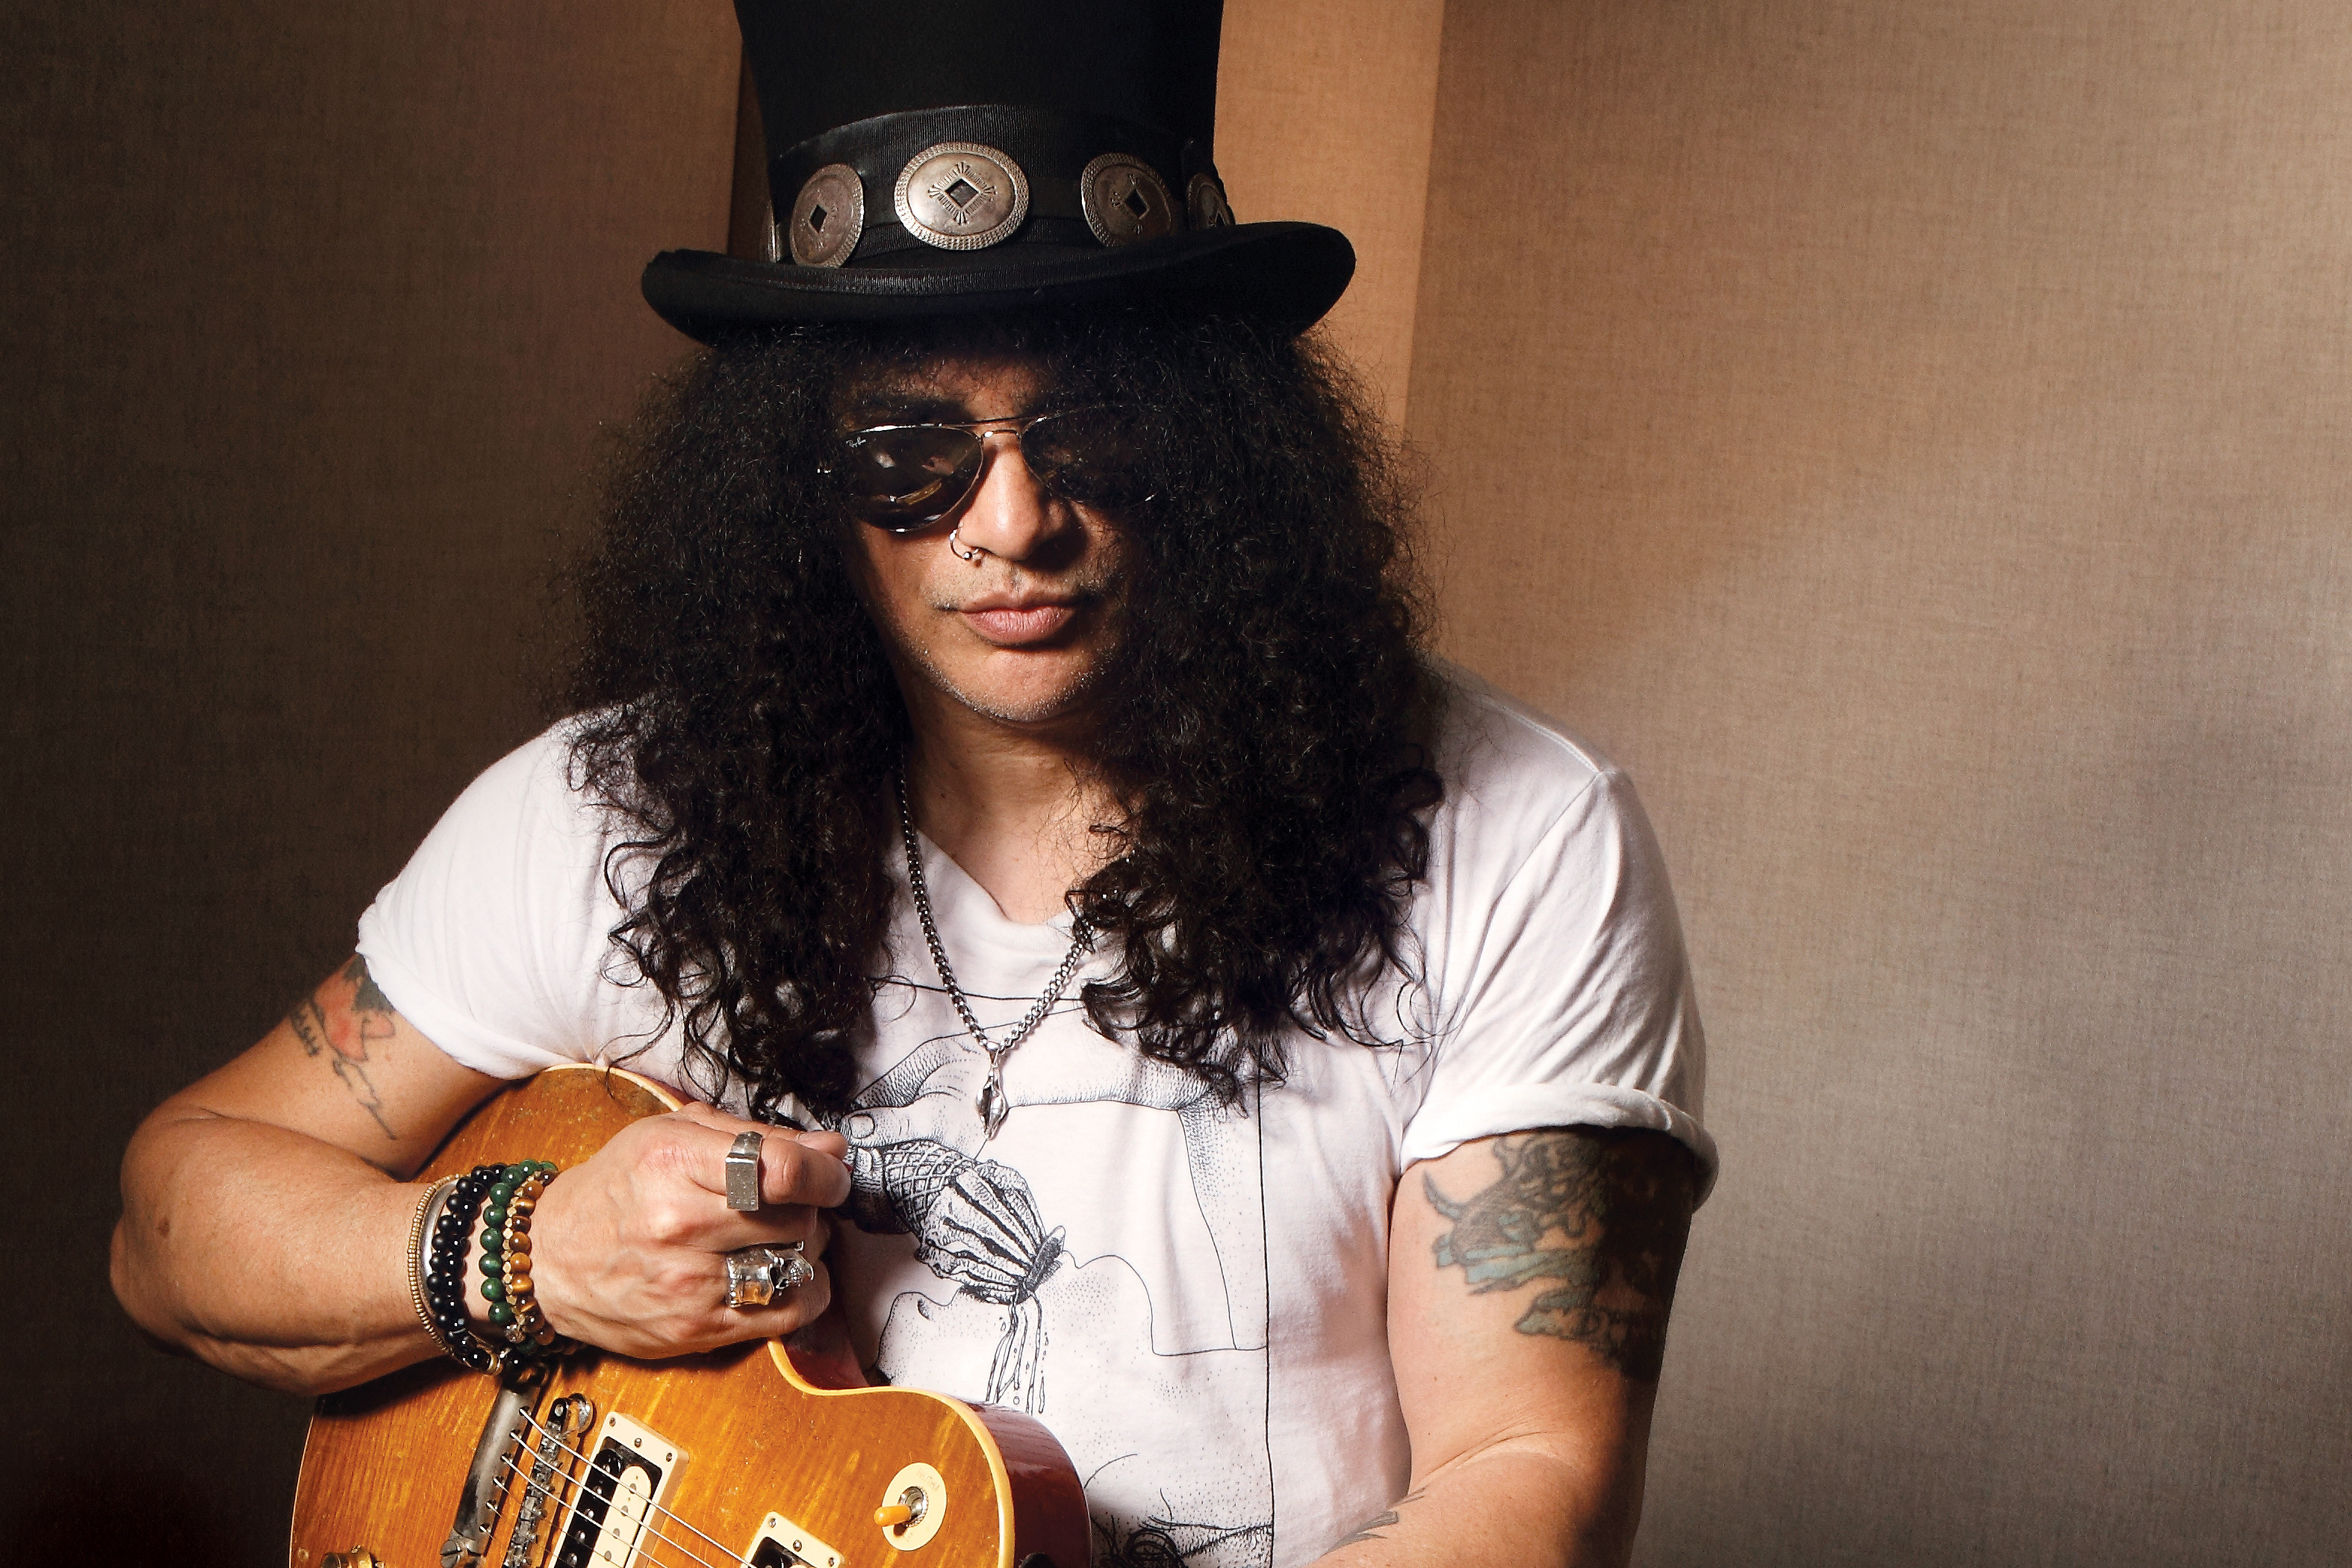 Guns N' Roses' guitarist Slash confirms that a new GNR album is in the works